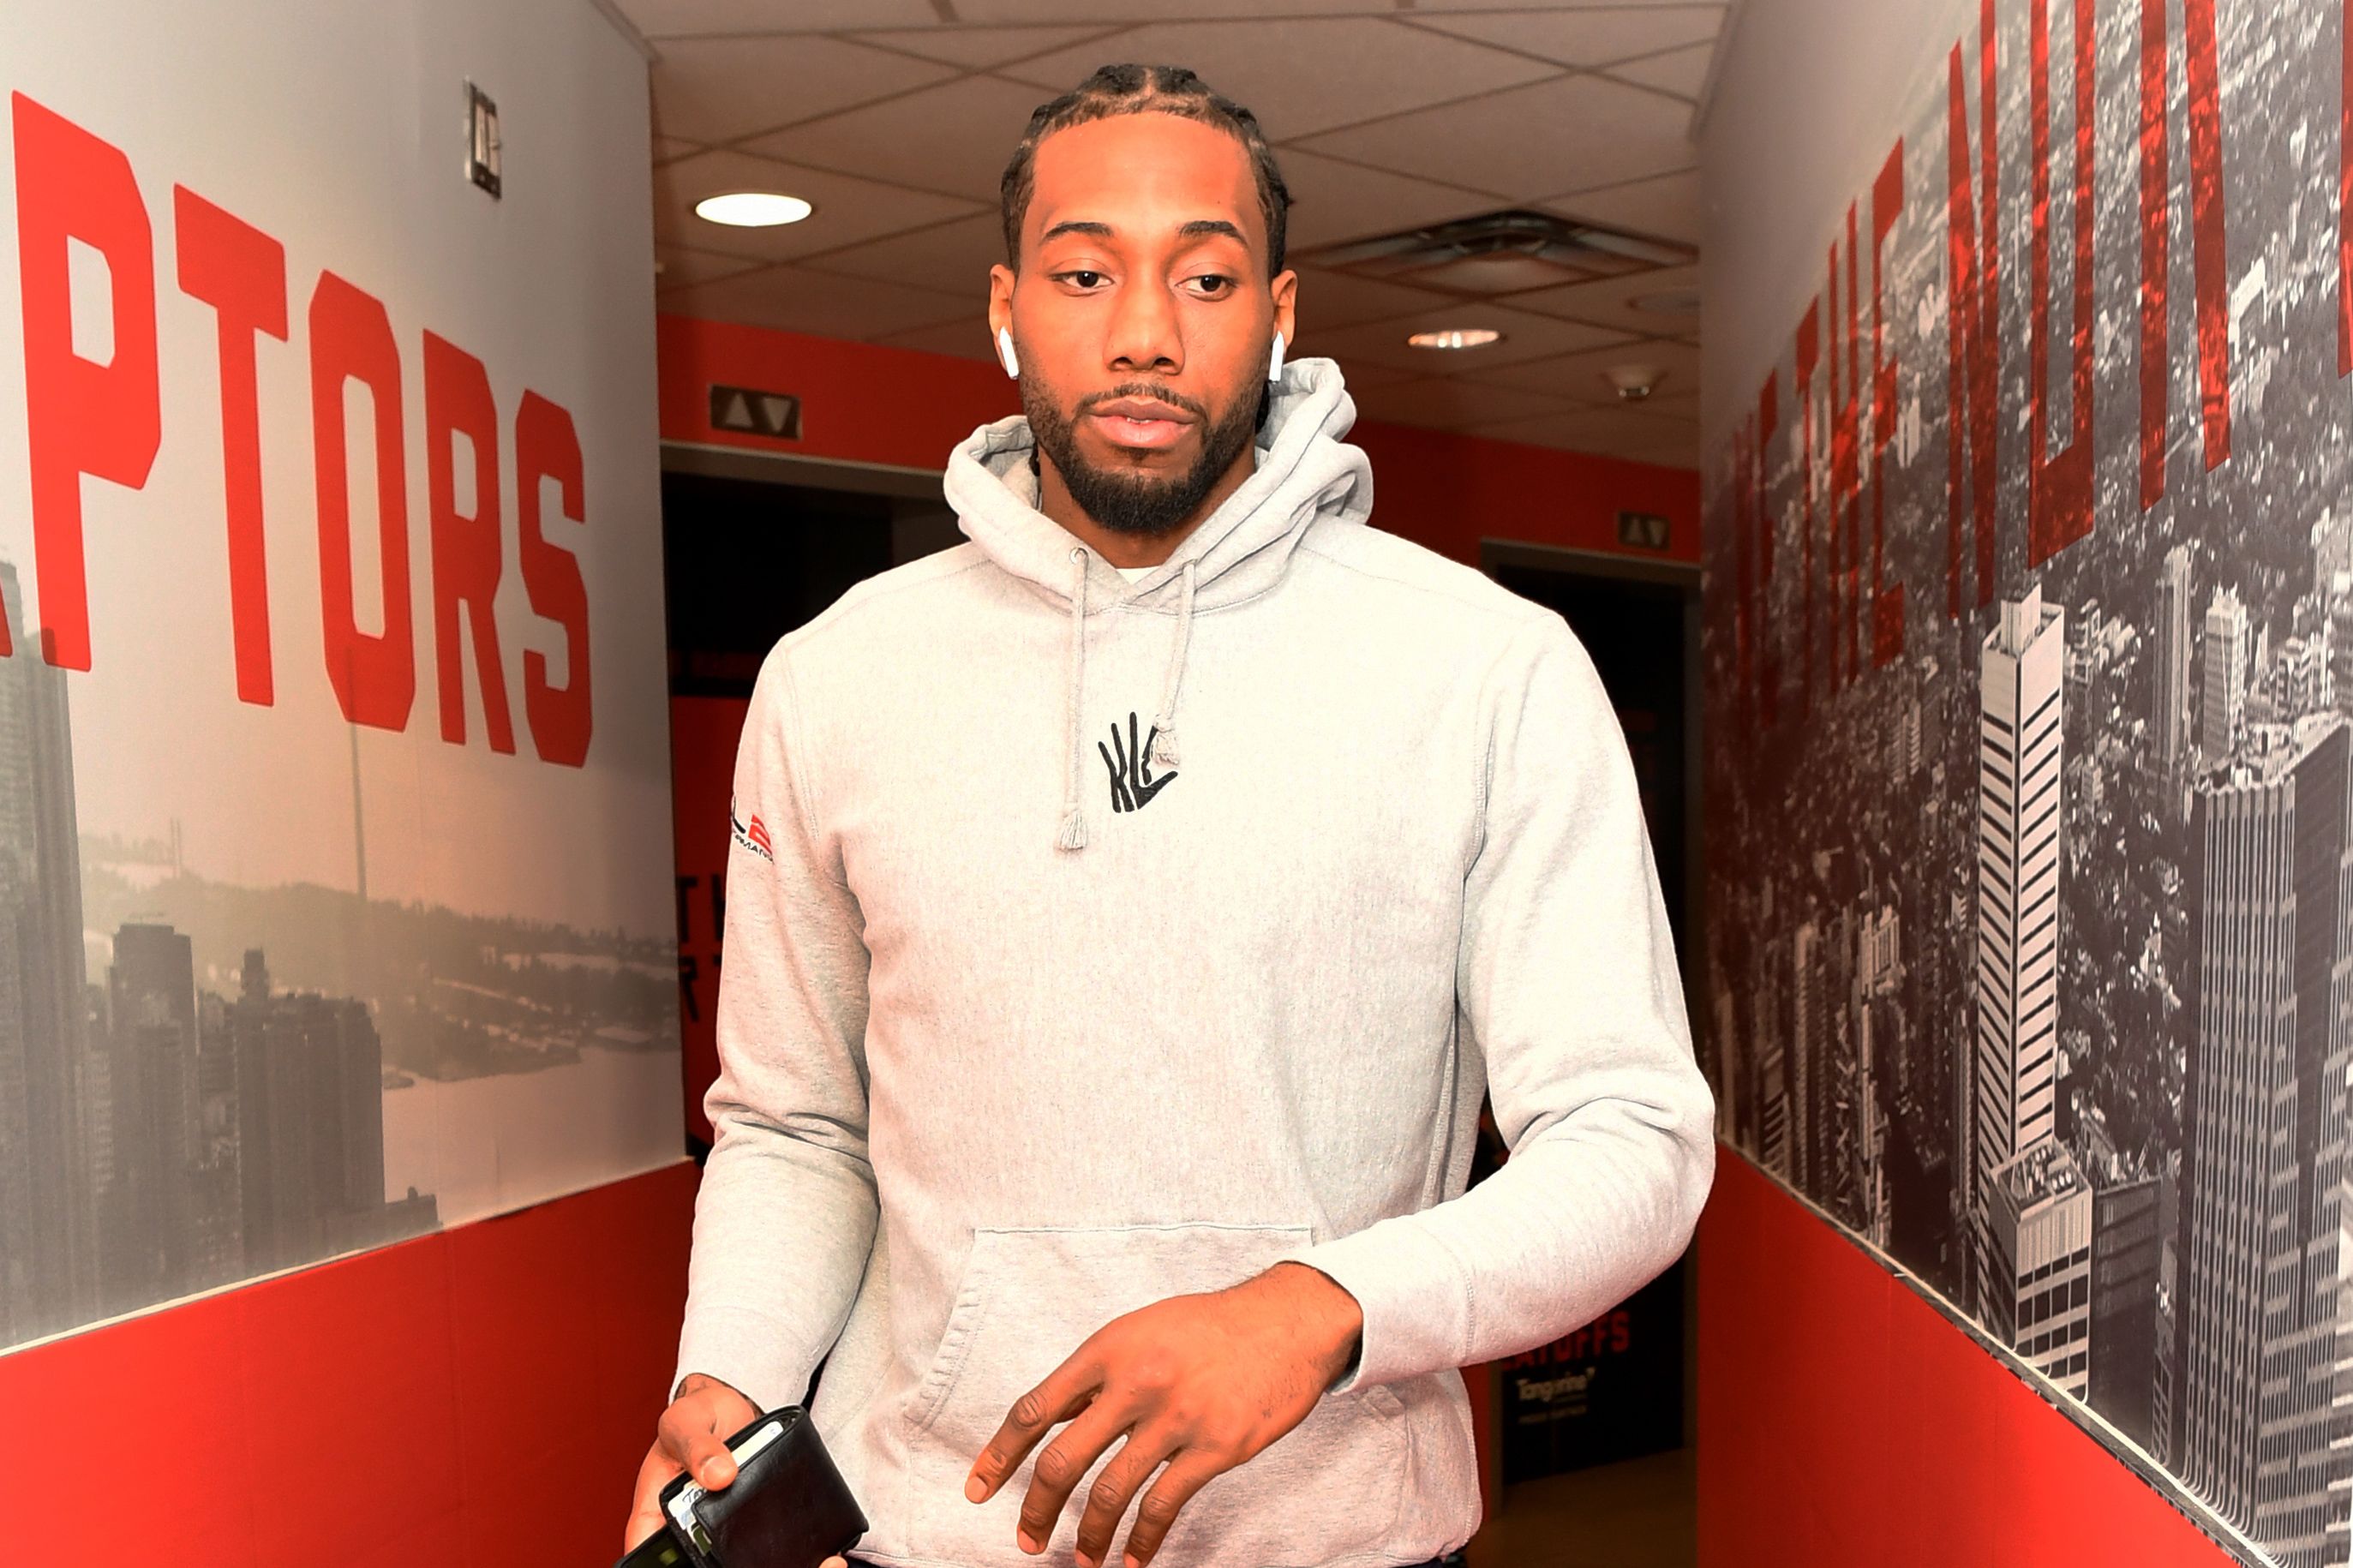 Nike may not have a lot to gain taking on Kawhi Leonard over 'Klaw' logo